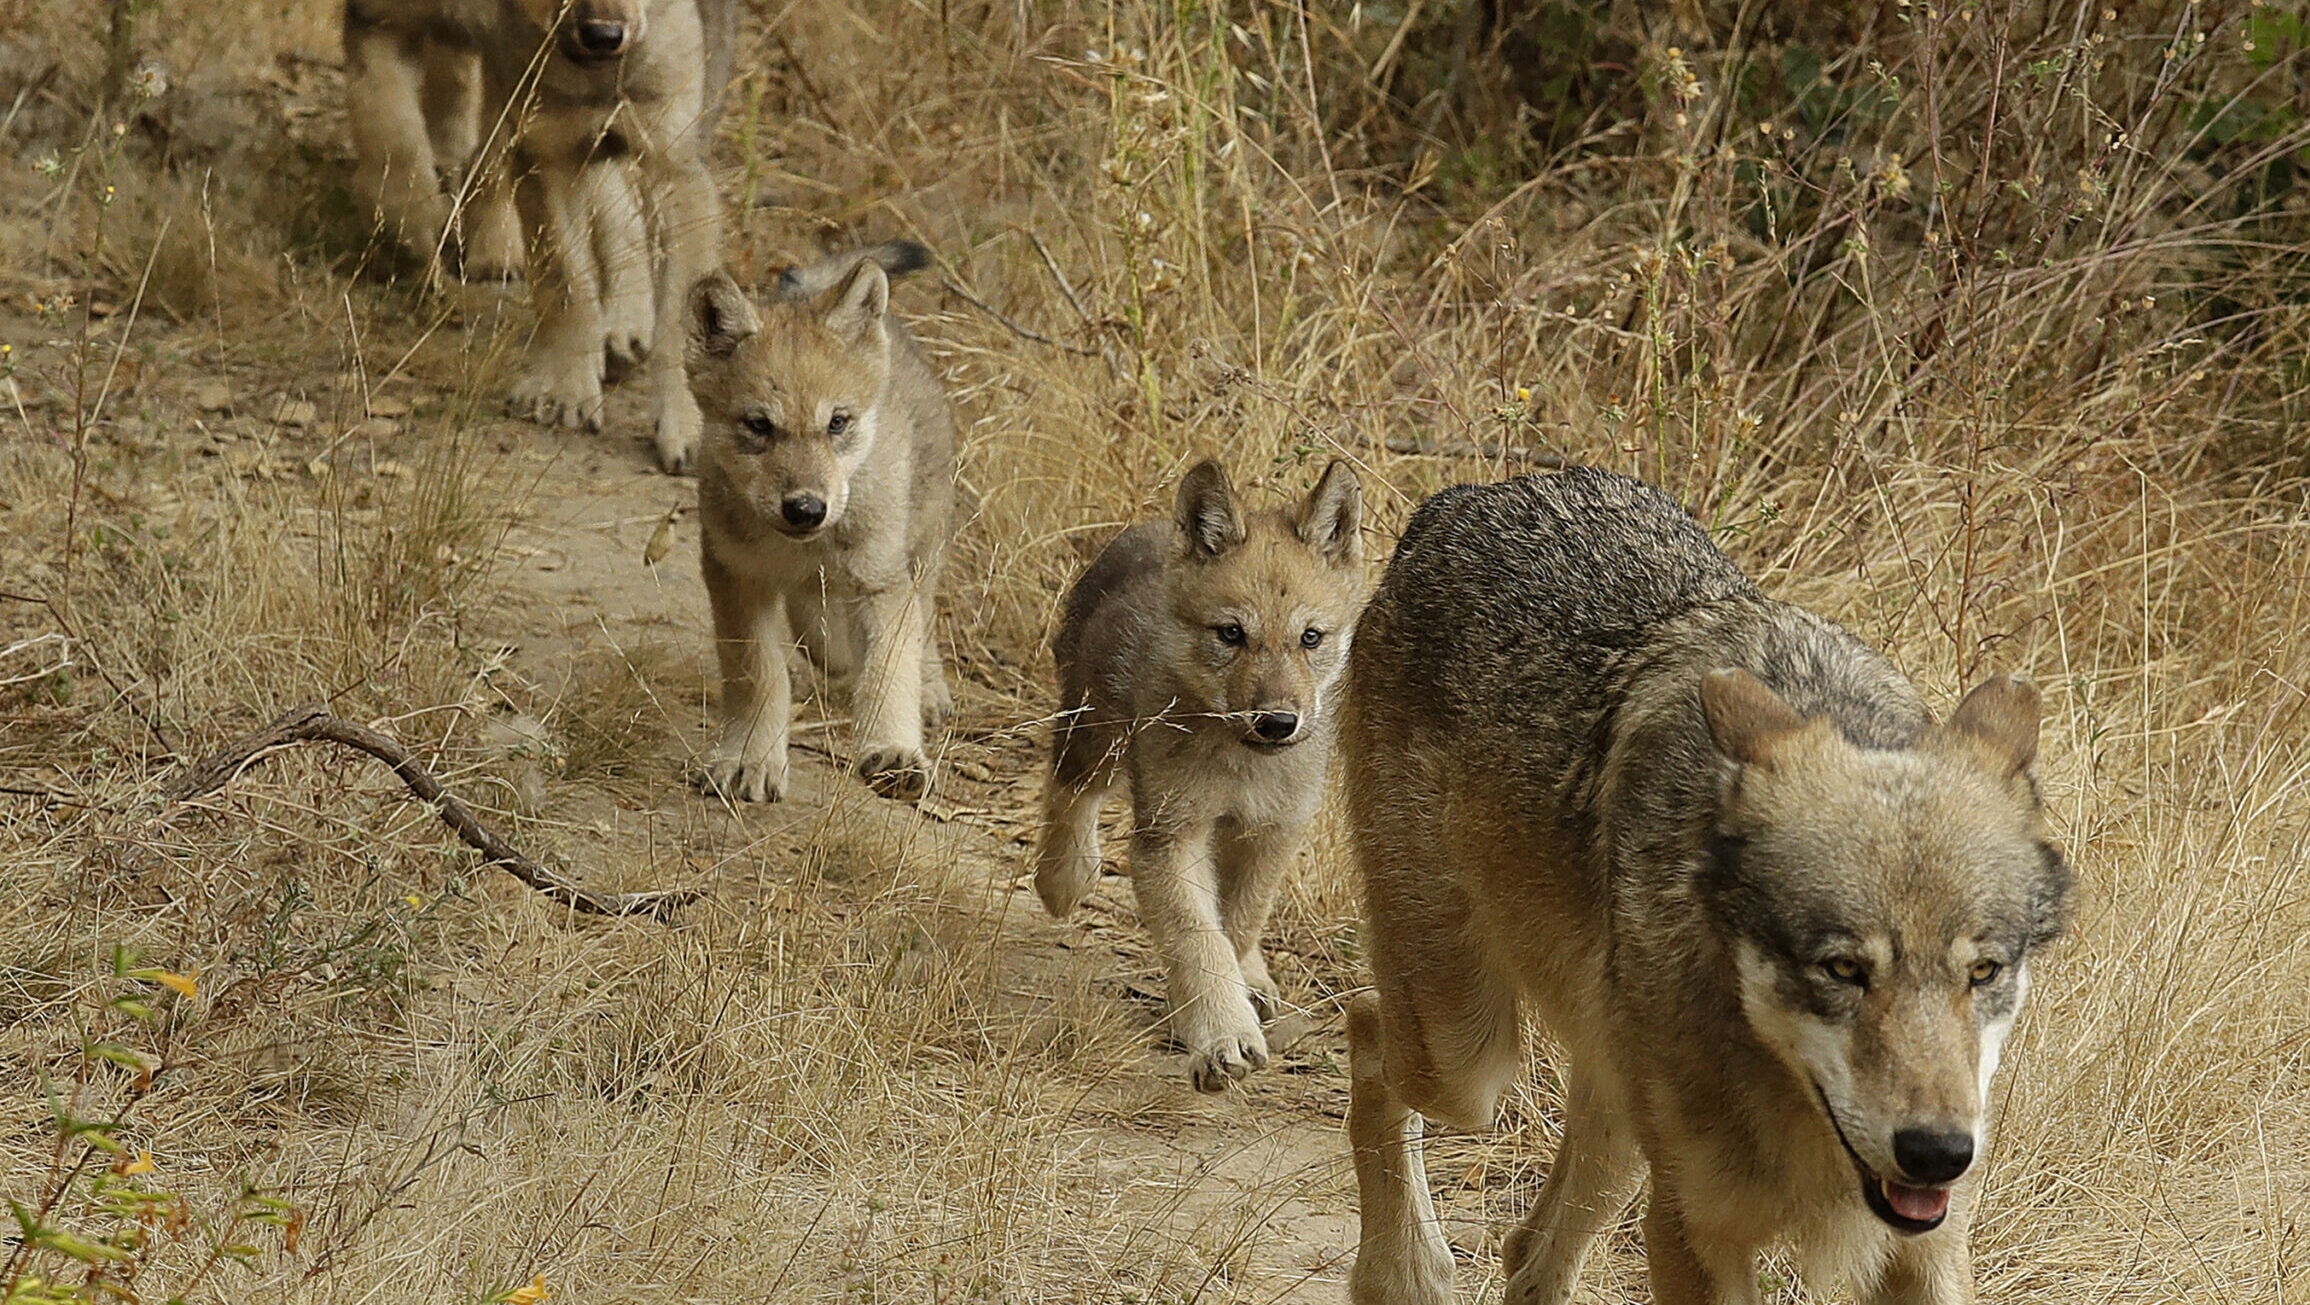 SEQUOIA NATIONAL PARK, Calif. (AP) — A new pack of gray wolves has shown up in California's Sierr...